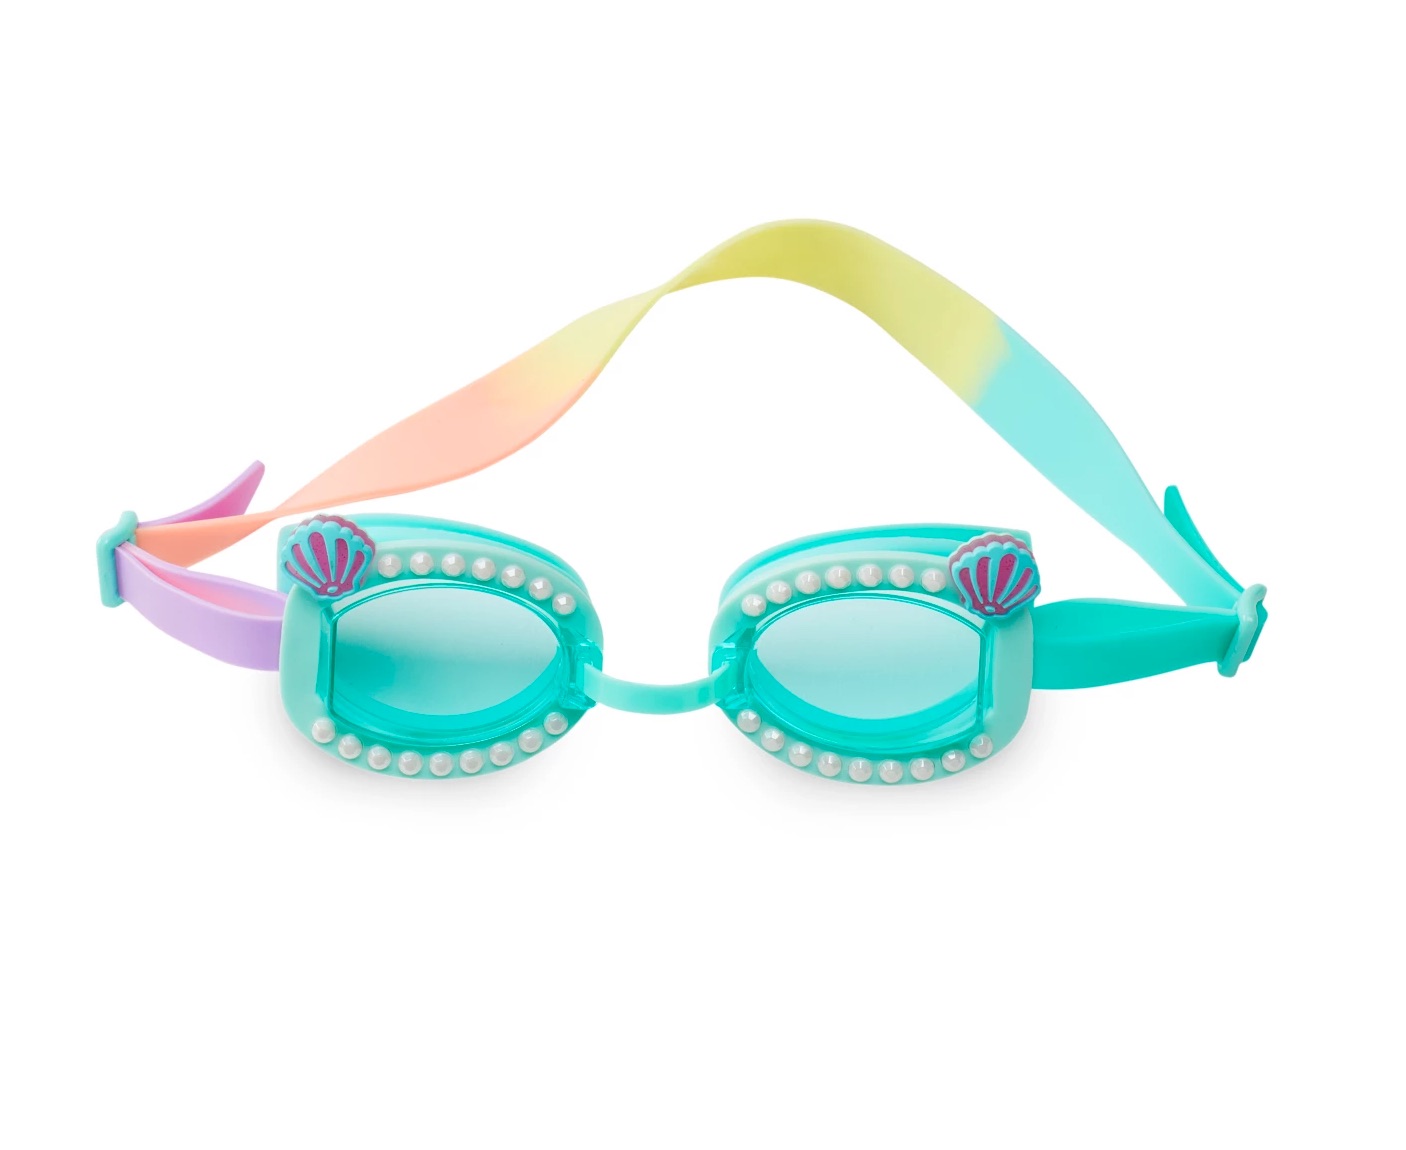 Fun swim goggles for kids: Ariel goggles at Disney, because pearls are always classic right?